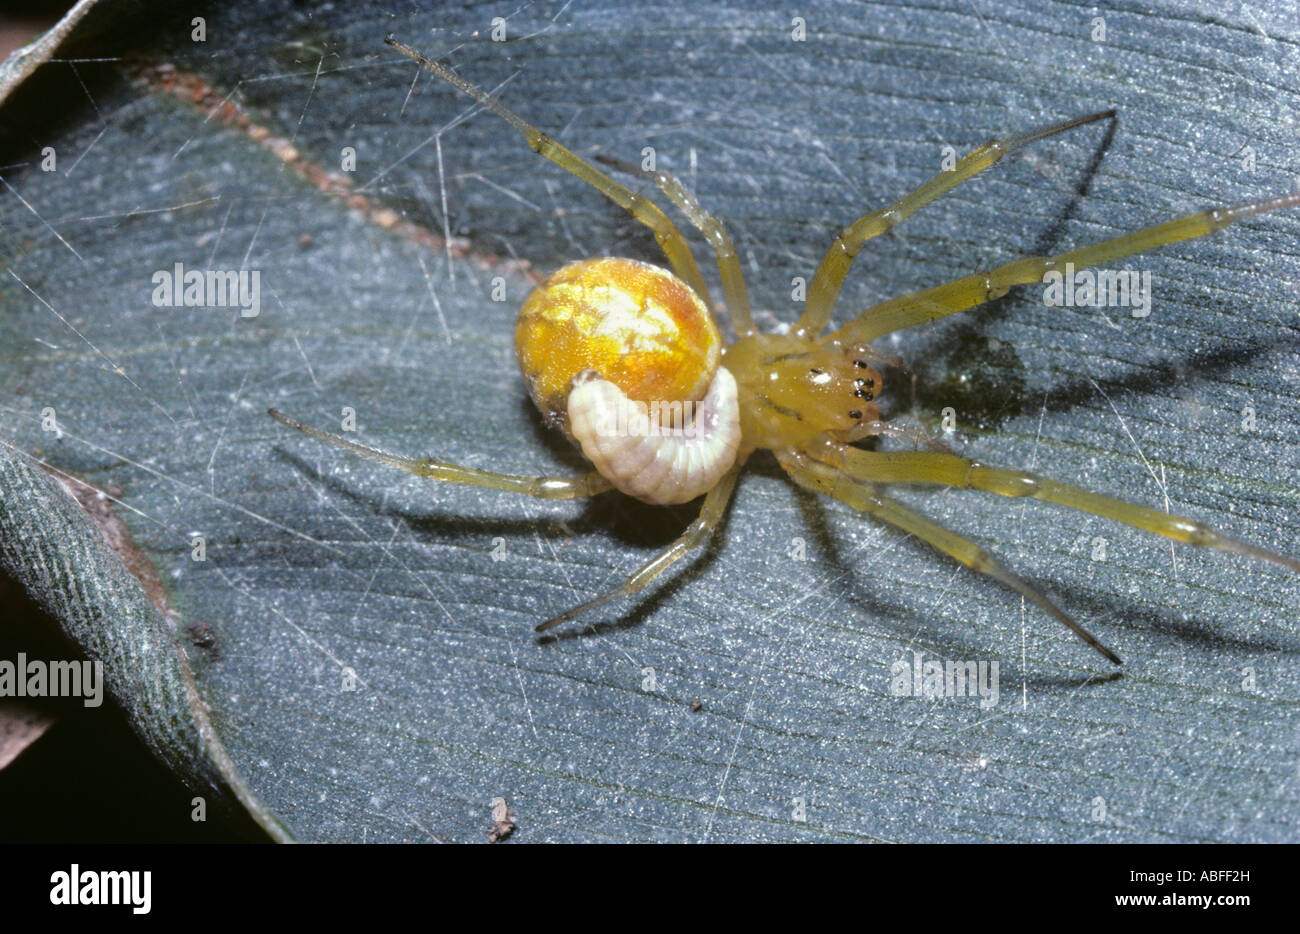 Parasitic larva of a wasp Pompilidae attached to a Theridiid spider Australia Stock Photo